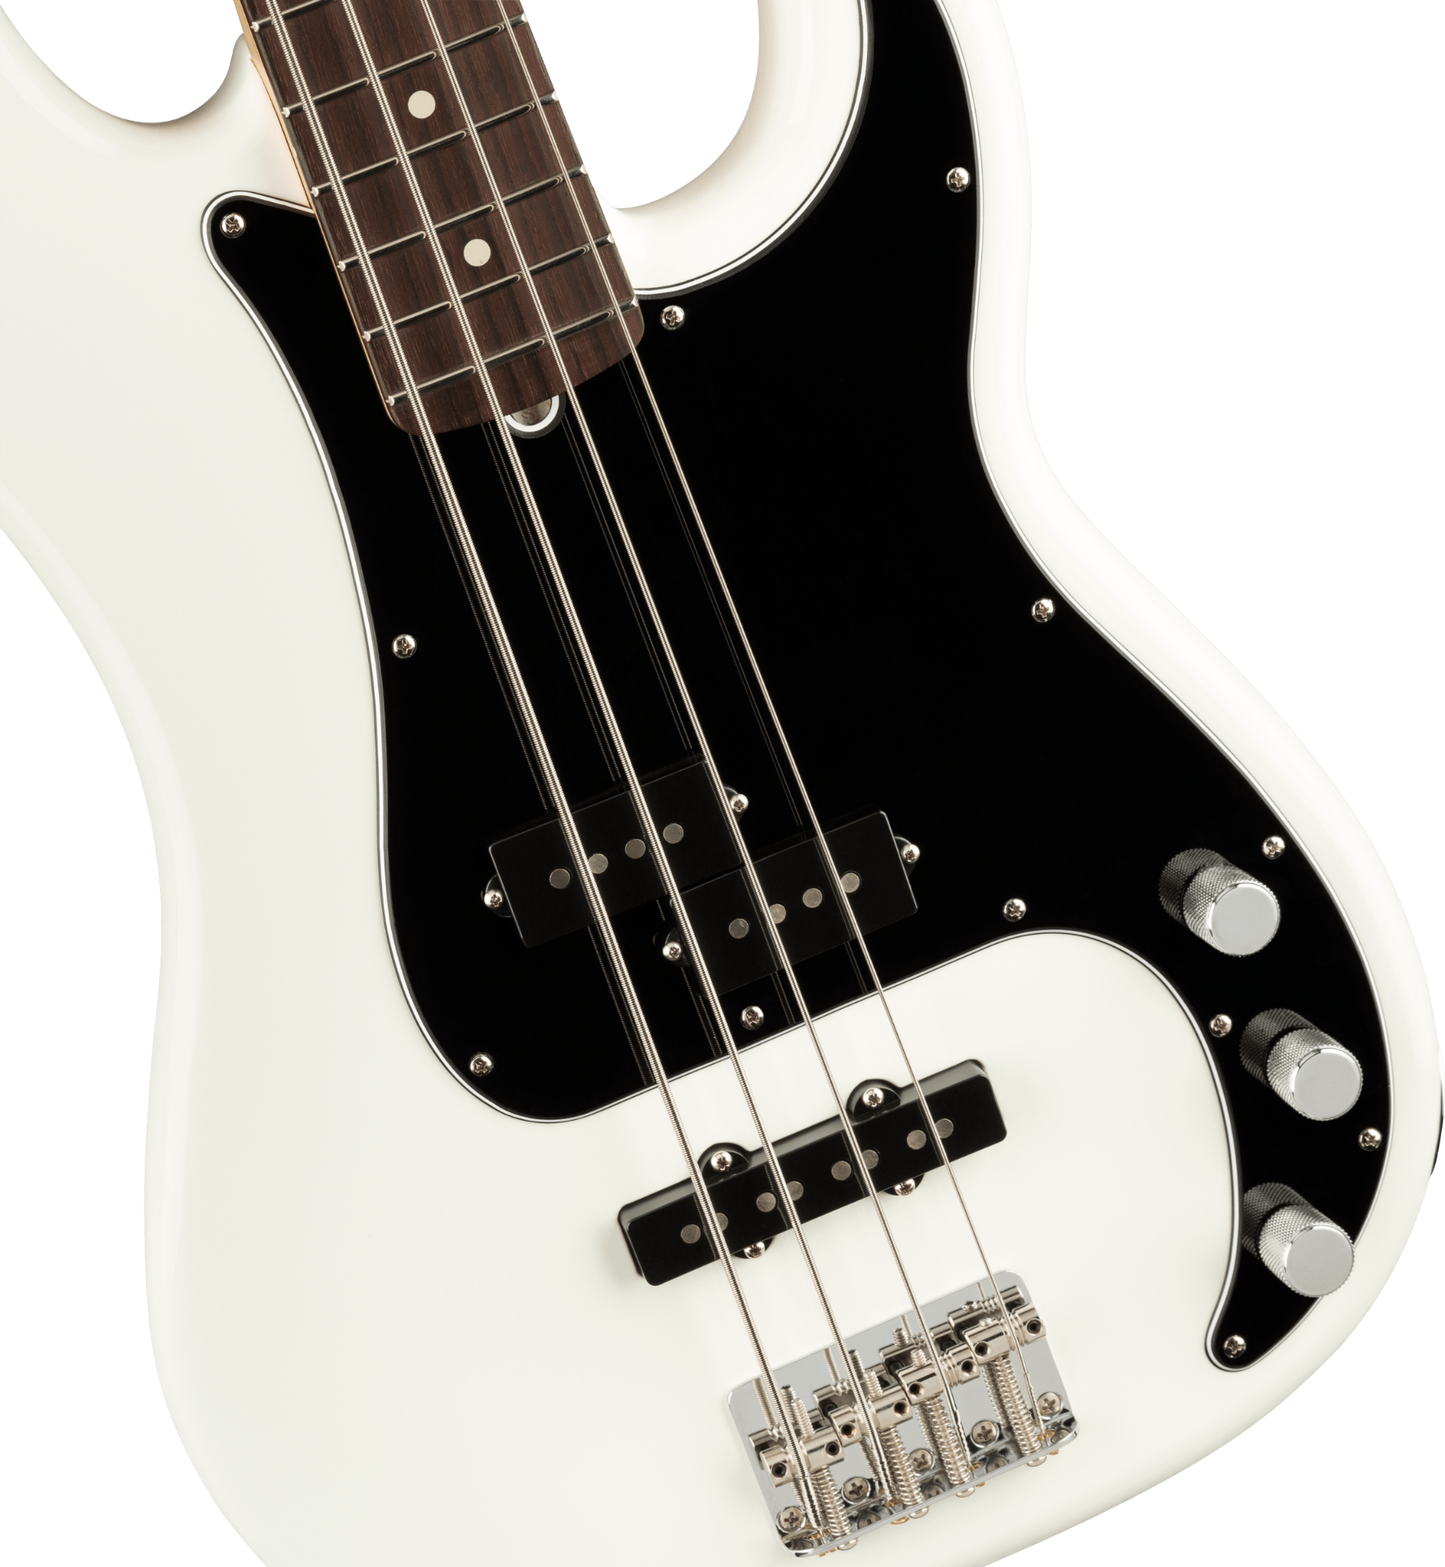 Fender American Performer Precision Bass 4 String Bass in Arctic White